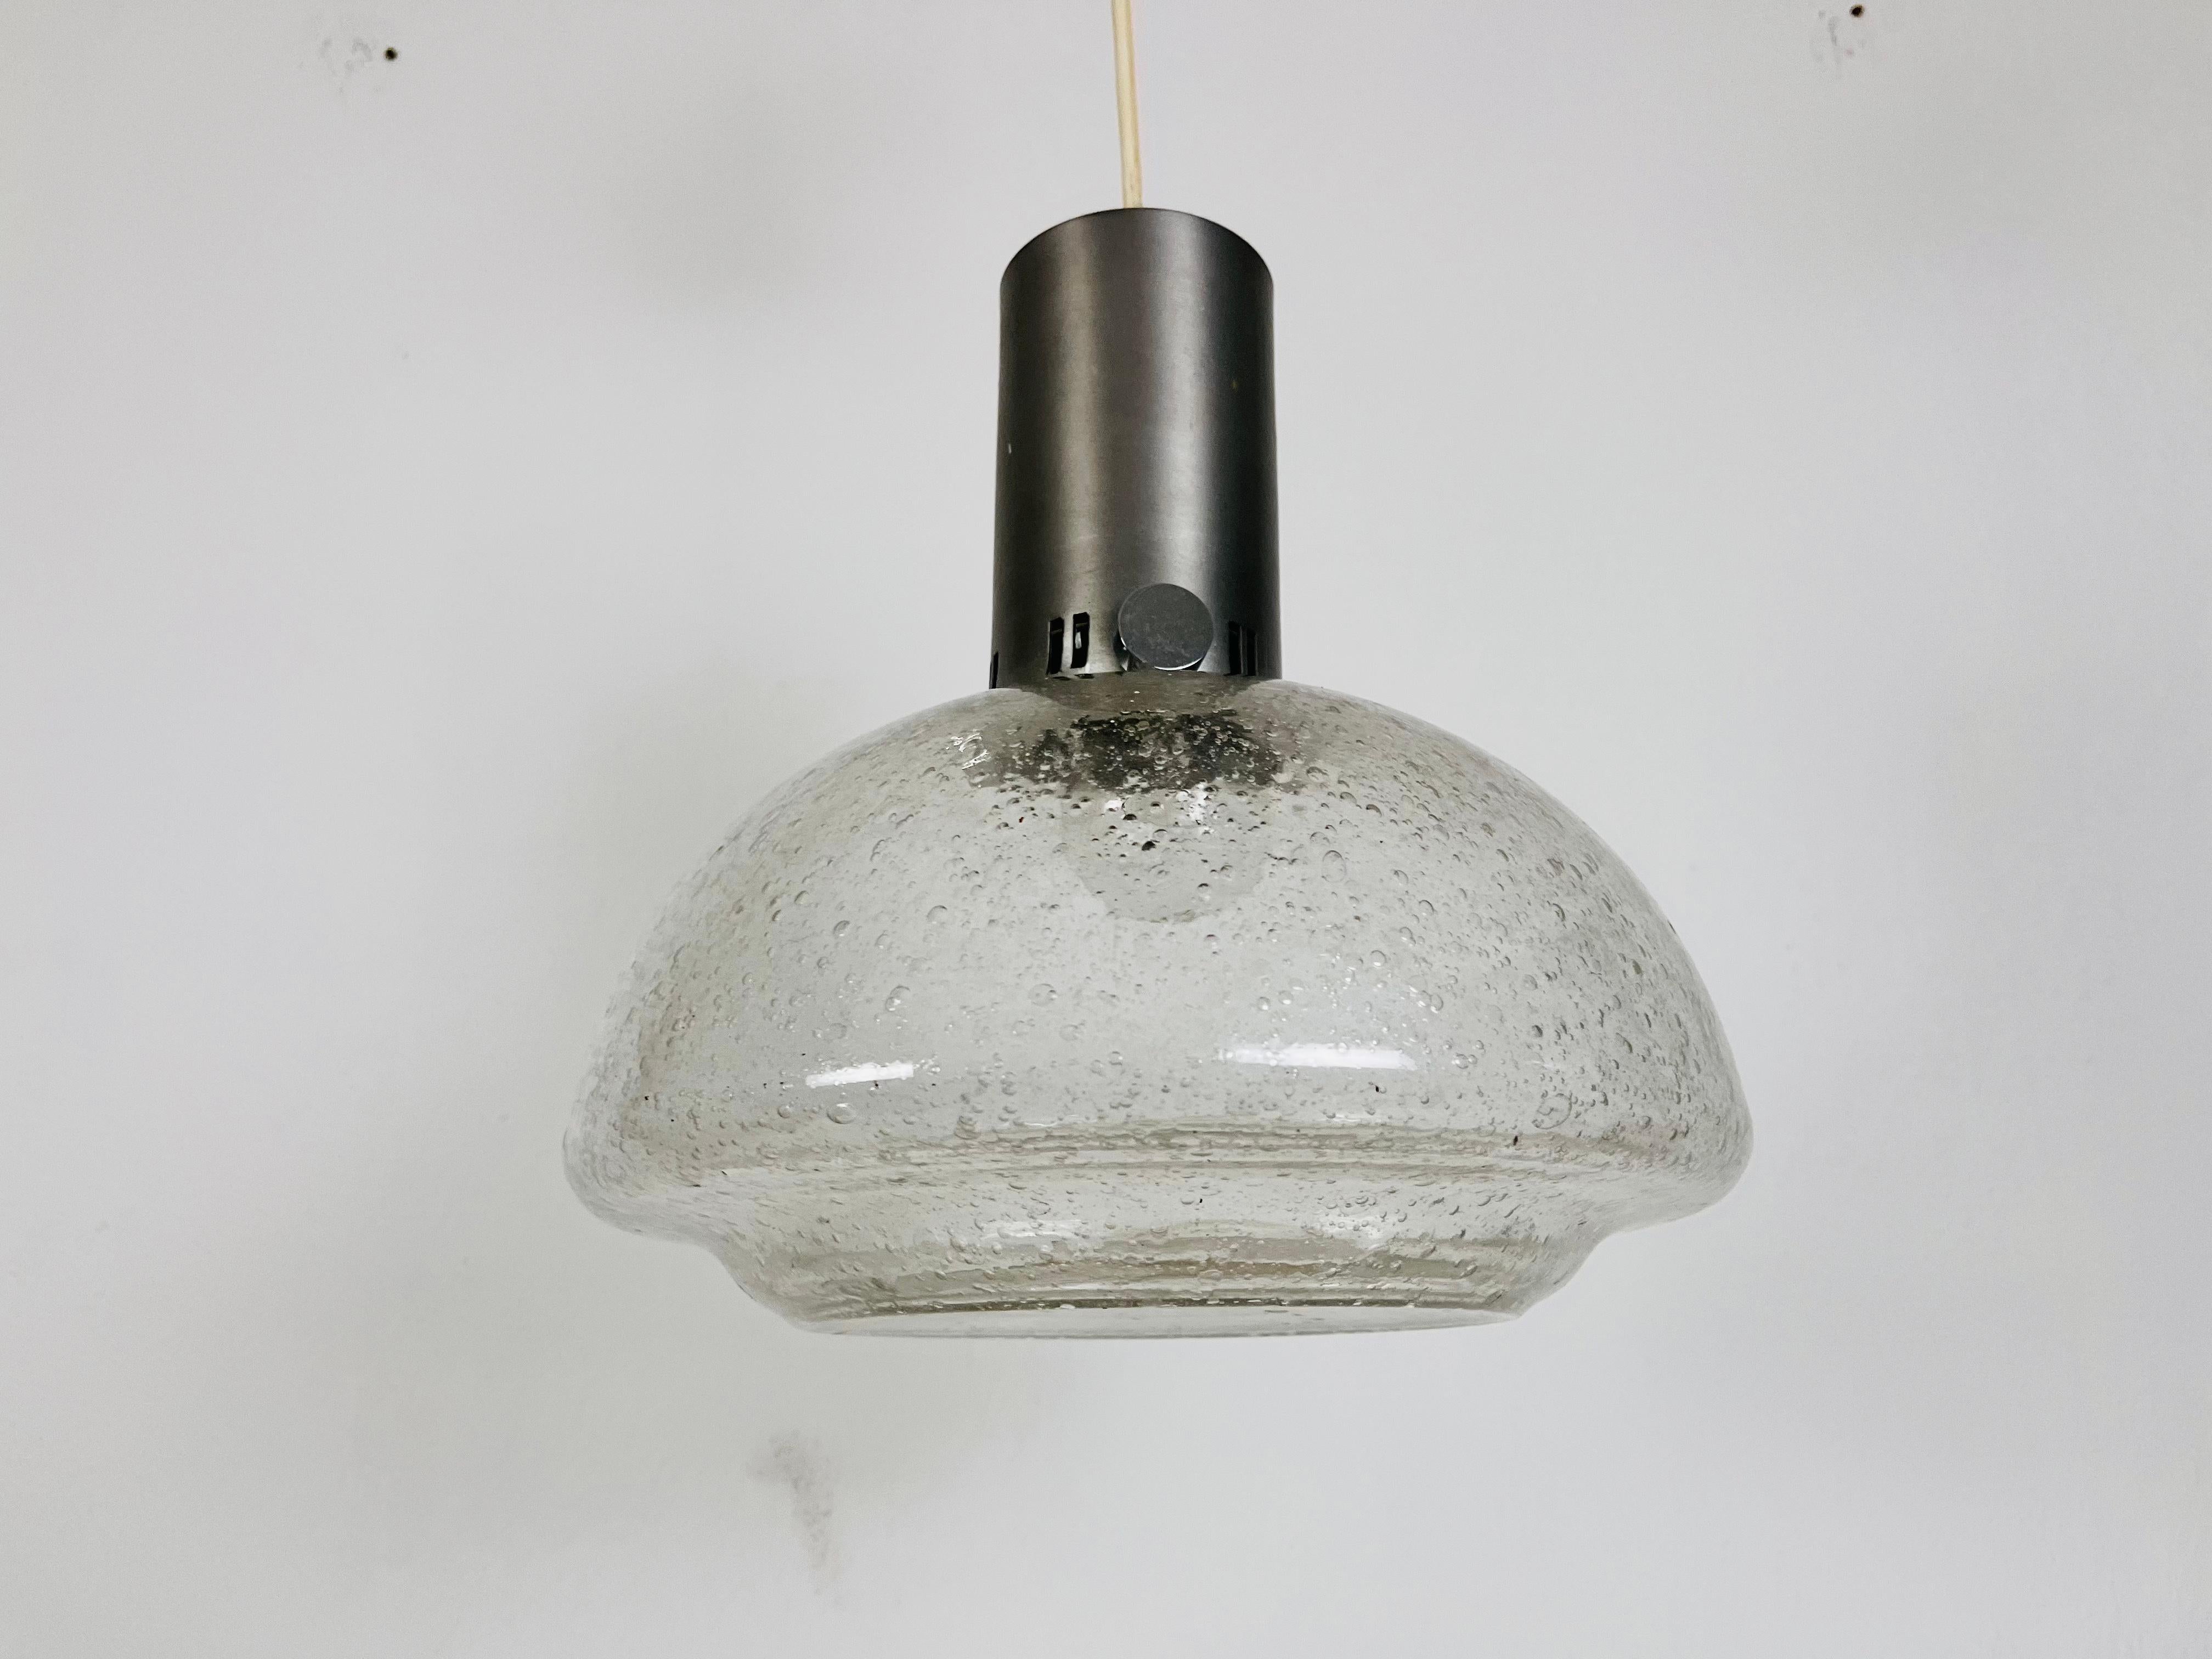 A Doria ice glass pendant lamp made in Germany in the 1960s. It is fascinating with its rare glass shape. 

Measurements: 
Height: 32-60 cm
Dia: 30 cm

The fixture requires one E27 light bulb. Works with both 120/220V. Good vintage